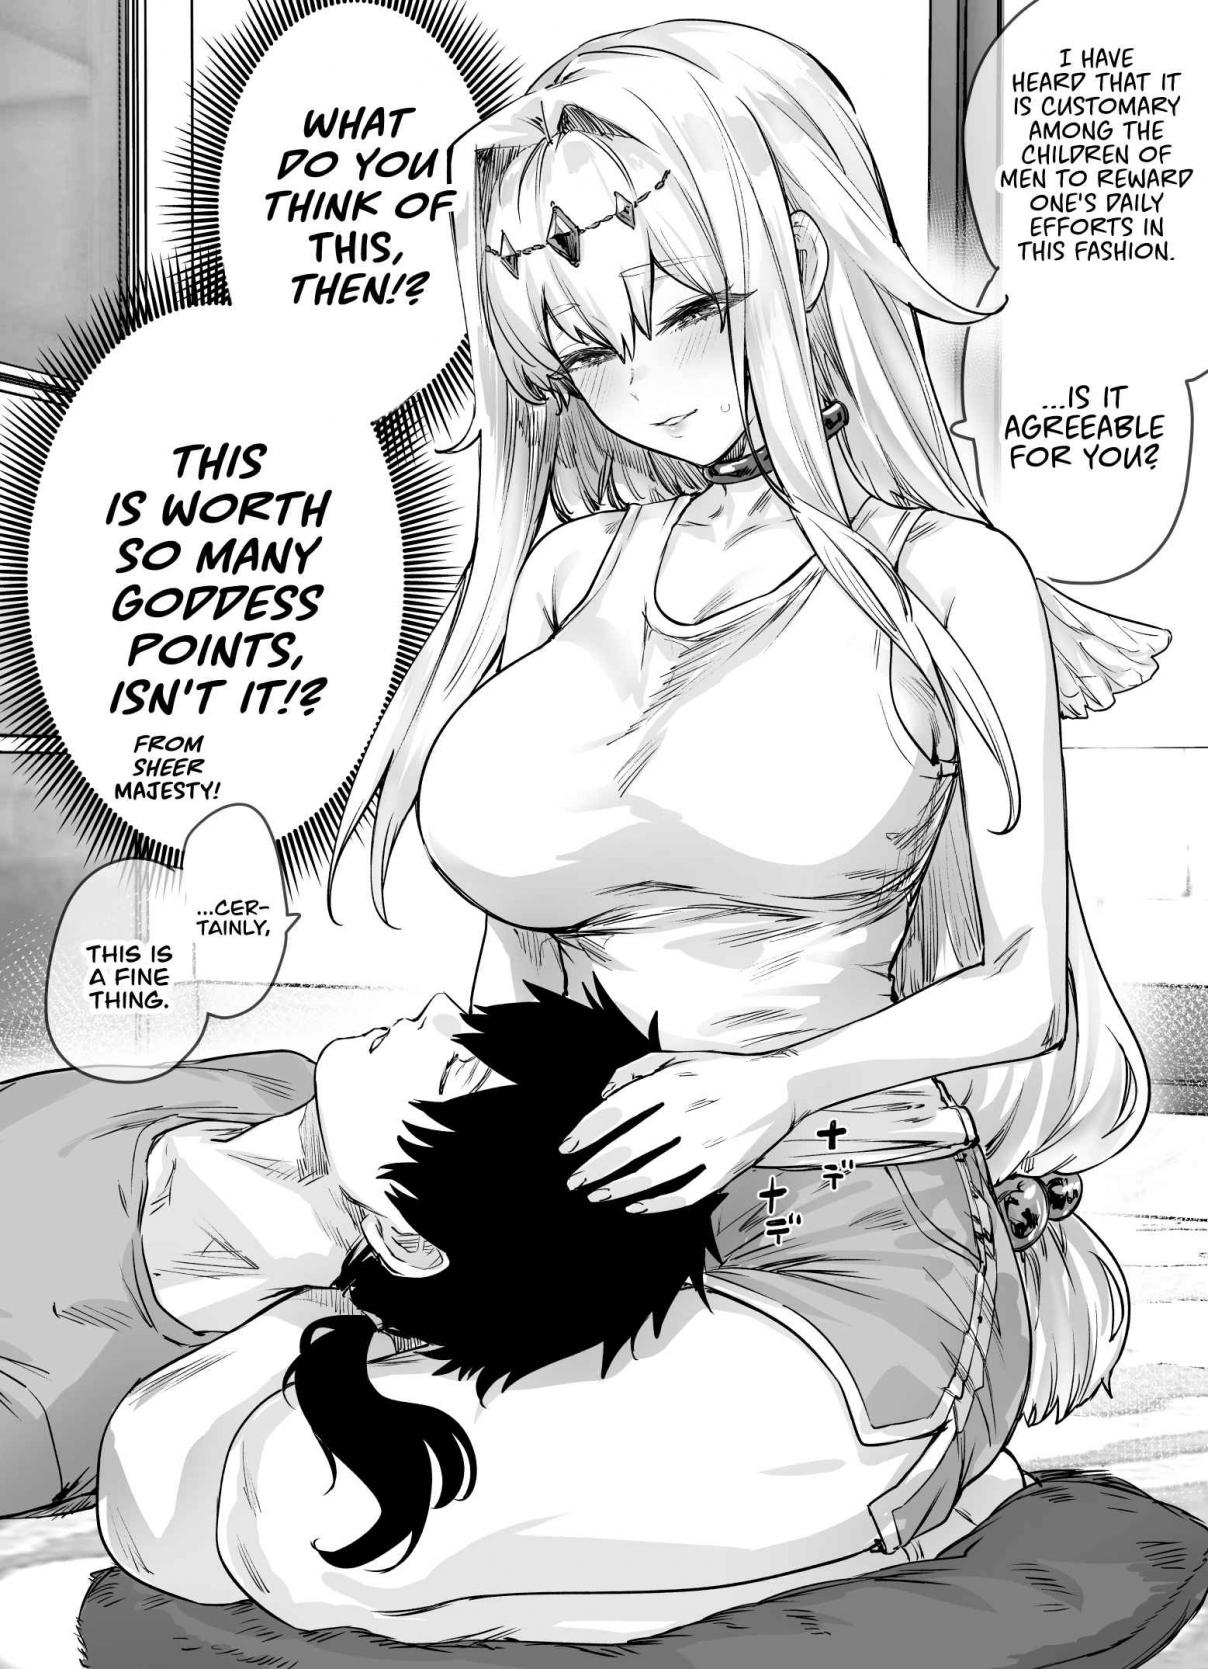 A Goddess Becoming Useless Due to an Overly Caring Man 2